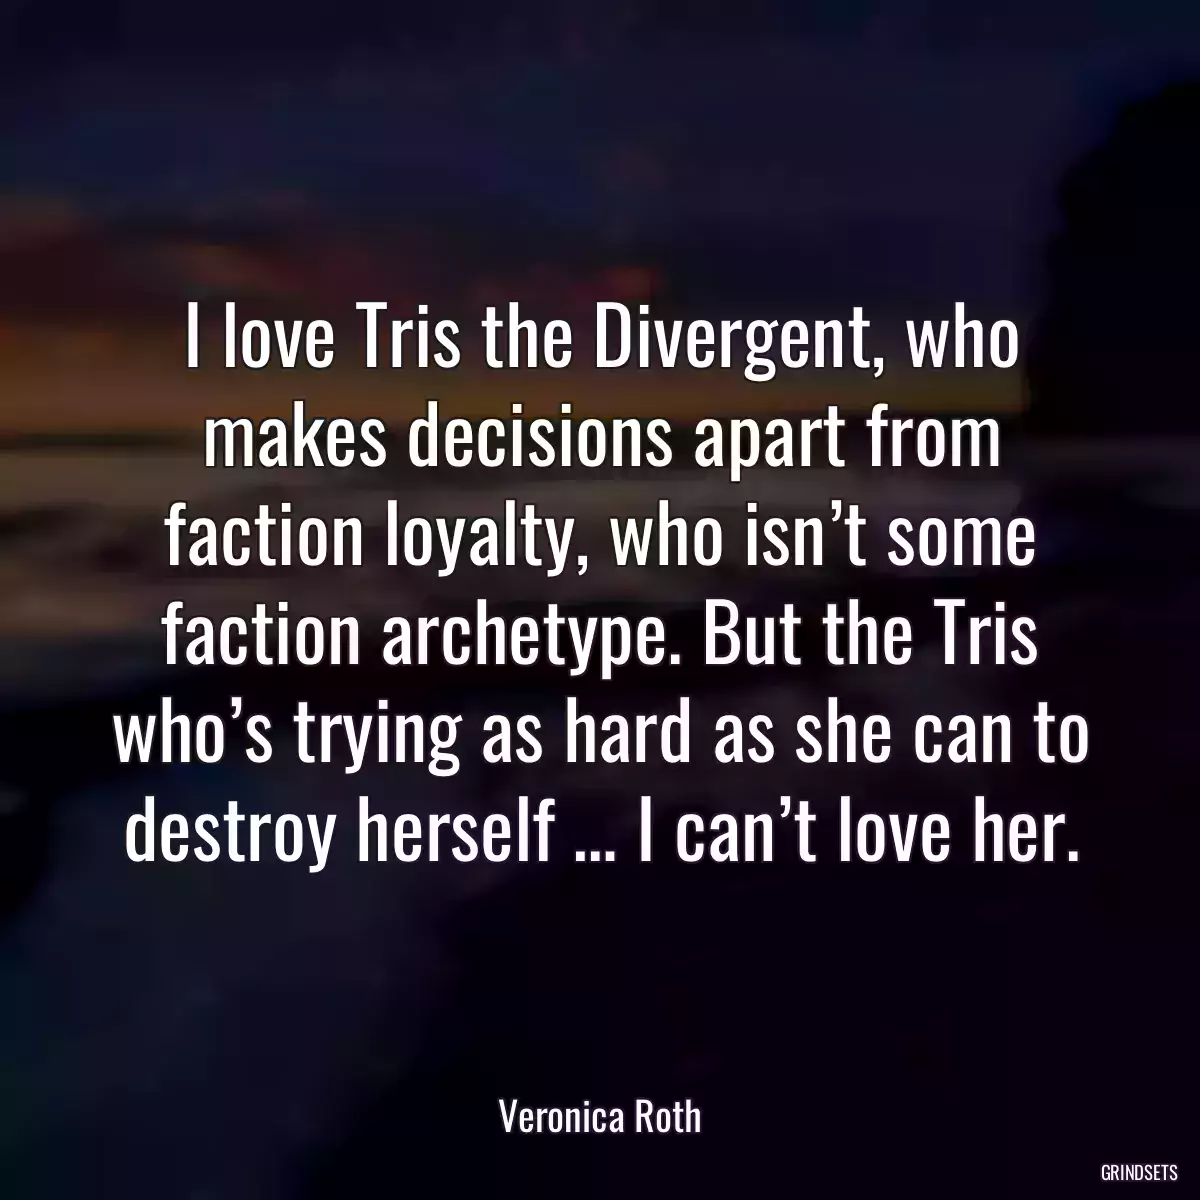 I love Tris the Divergent, who makes decisions apart from faction loyalty, who isn’t some faction archetype. But the Tris who’s trying as hard as she can to destroy herself … I can’t love her.